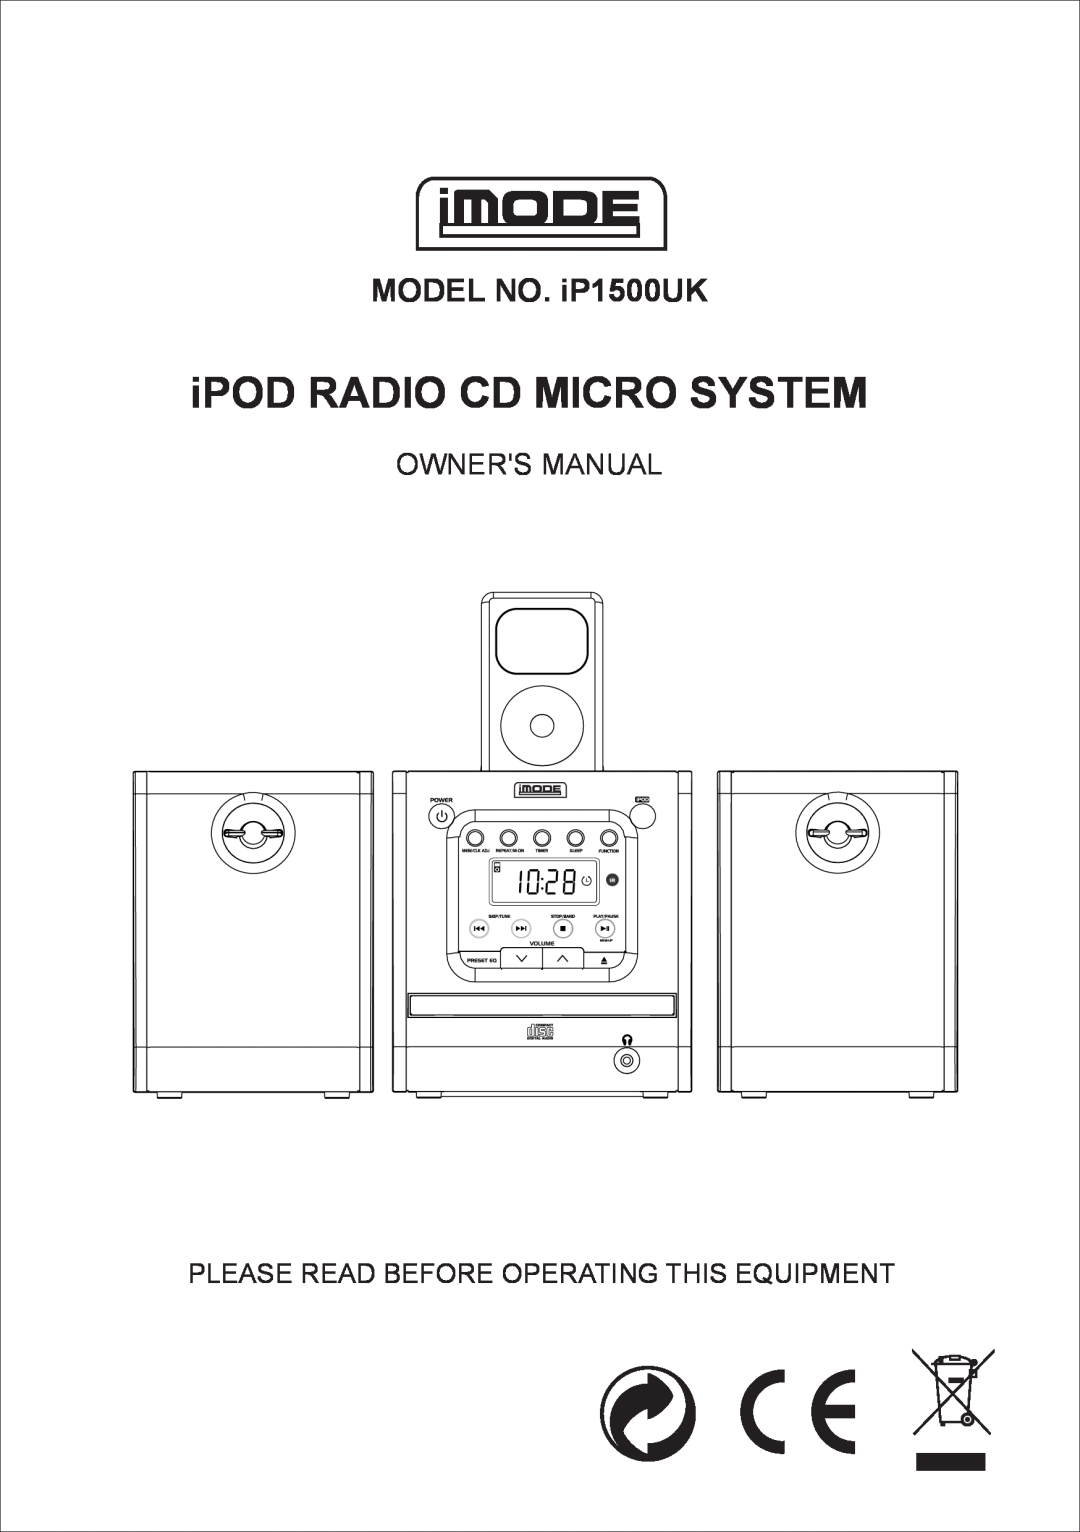 Curtis IP1500UK owner manual iPOD RADIO CD MICRO SYSTEM, MODEL NO. iP1500UK, Please Read Before Operating This Equipment 